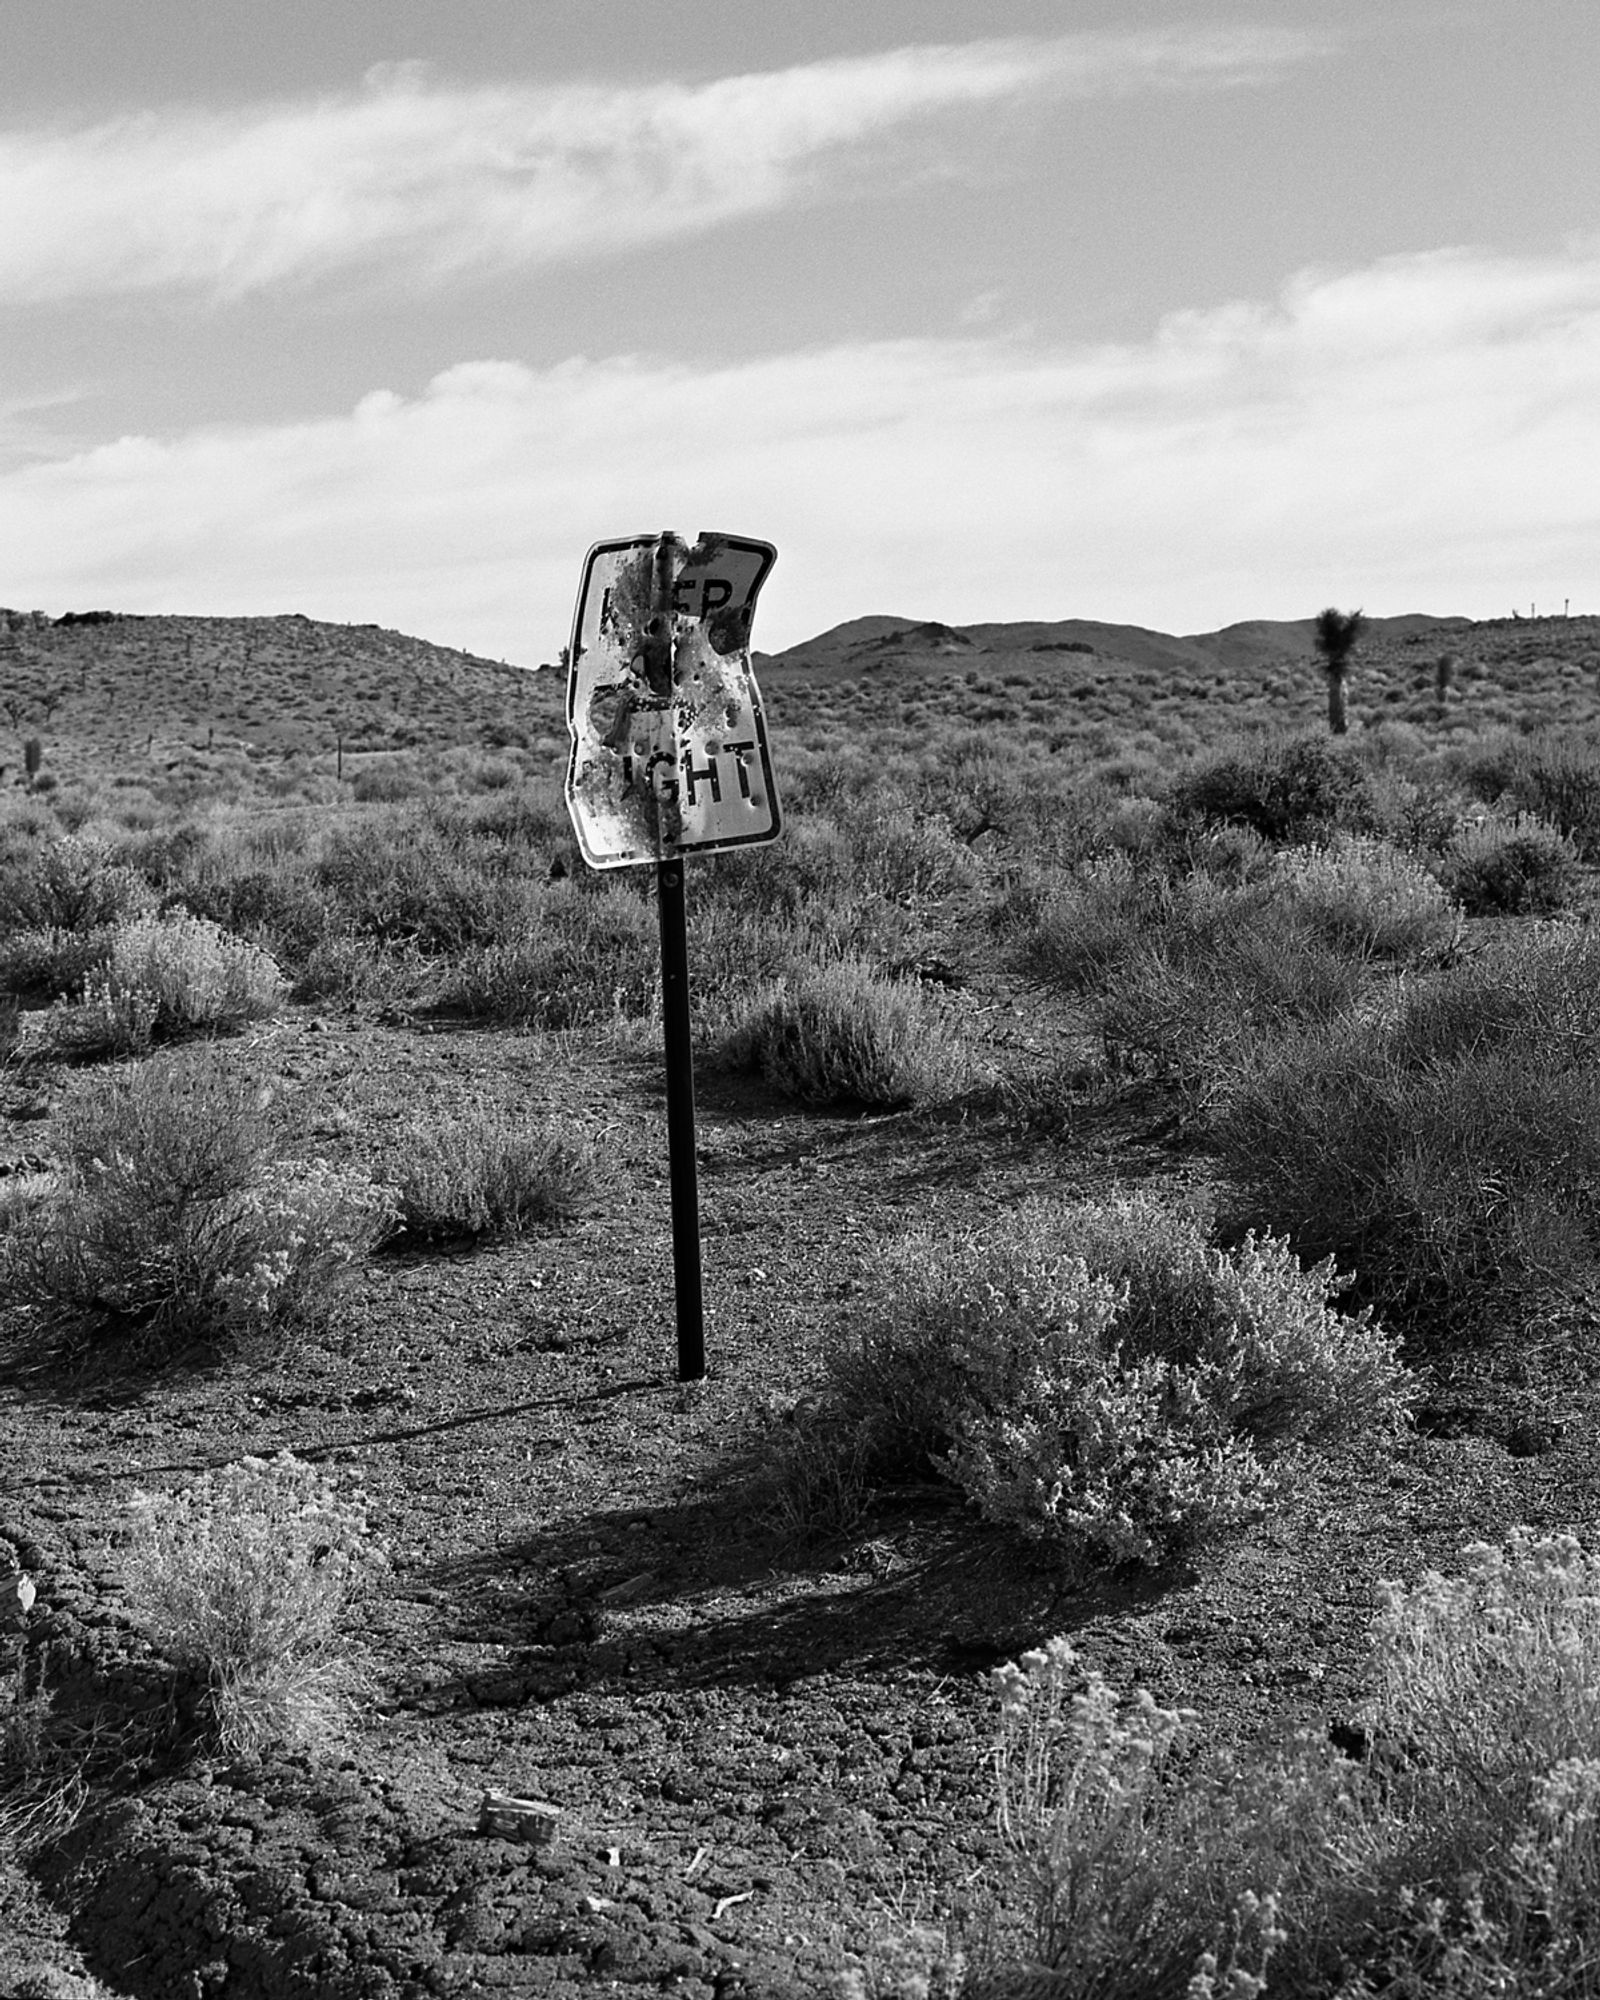 © William Mark Sommer - No Man's Land. The signs no longer read, the road turns to dirt and the land reclaims itself.